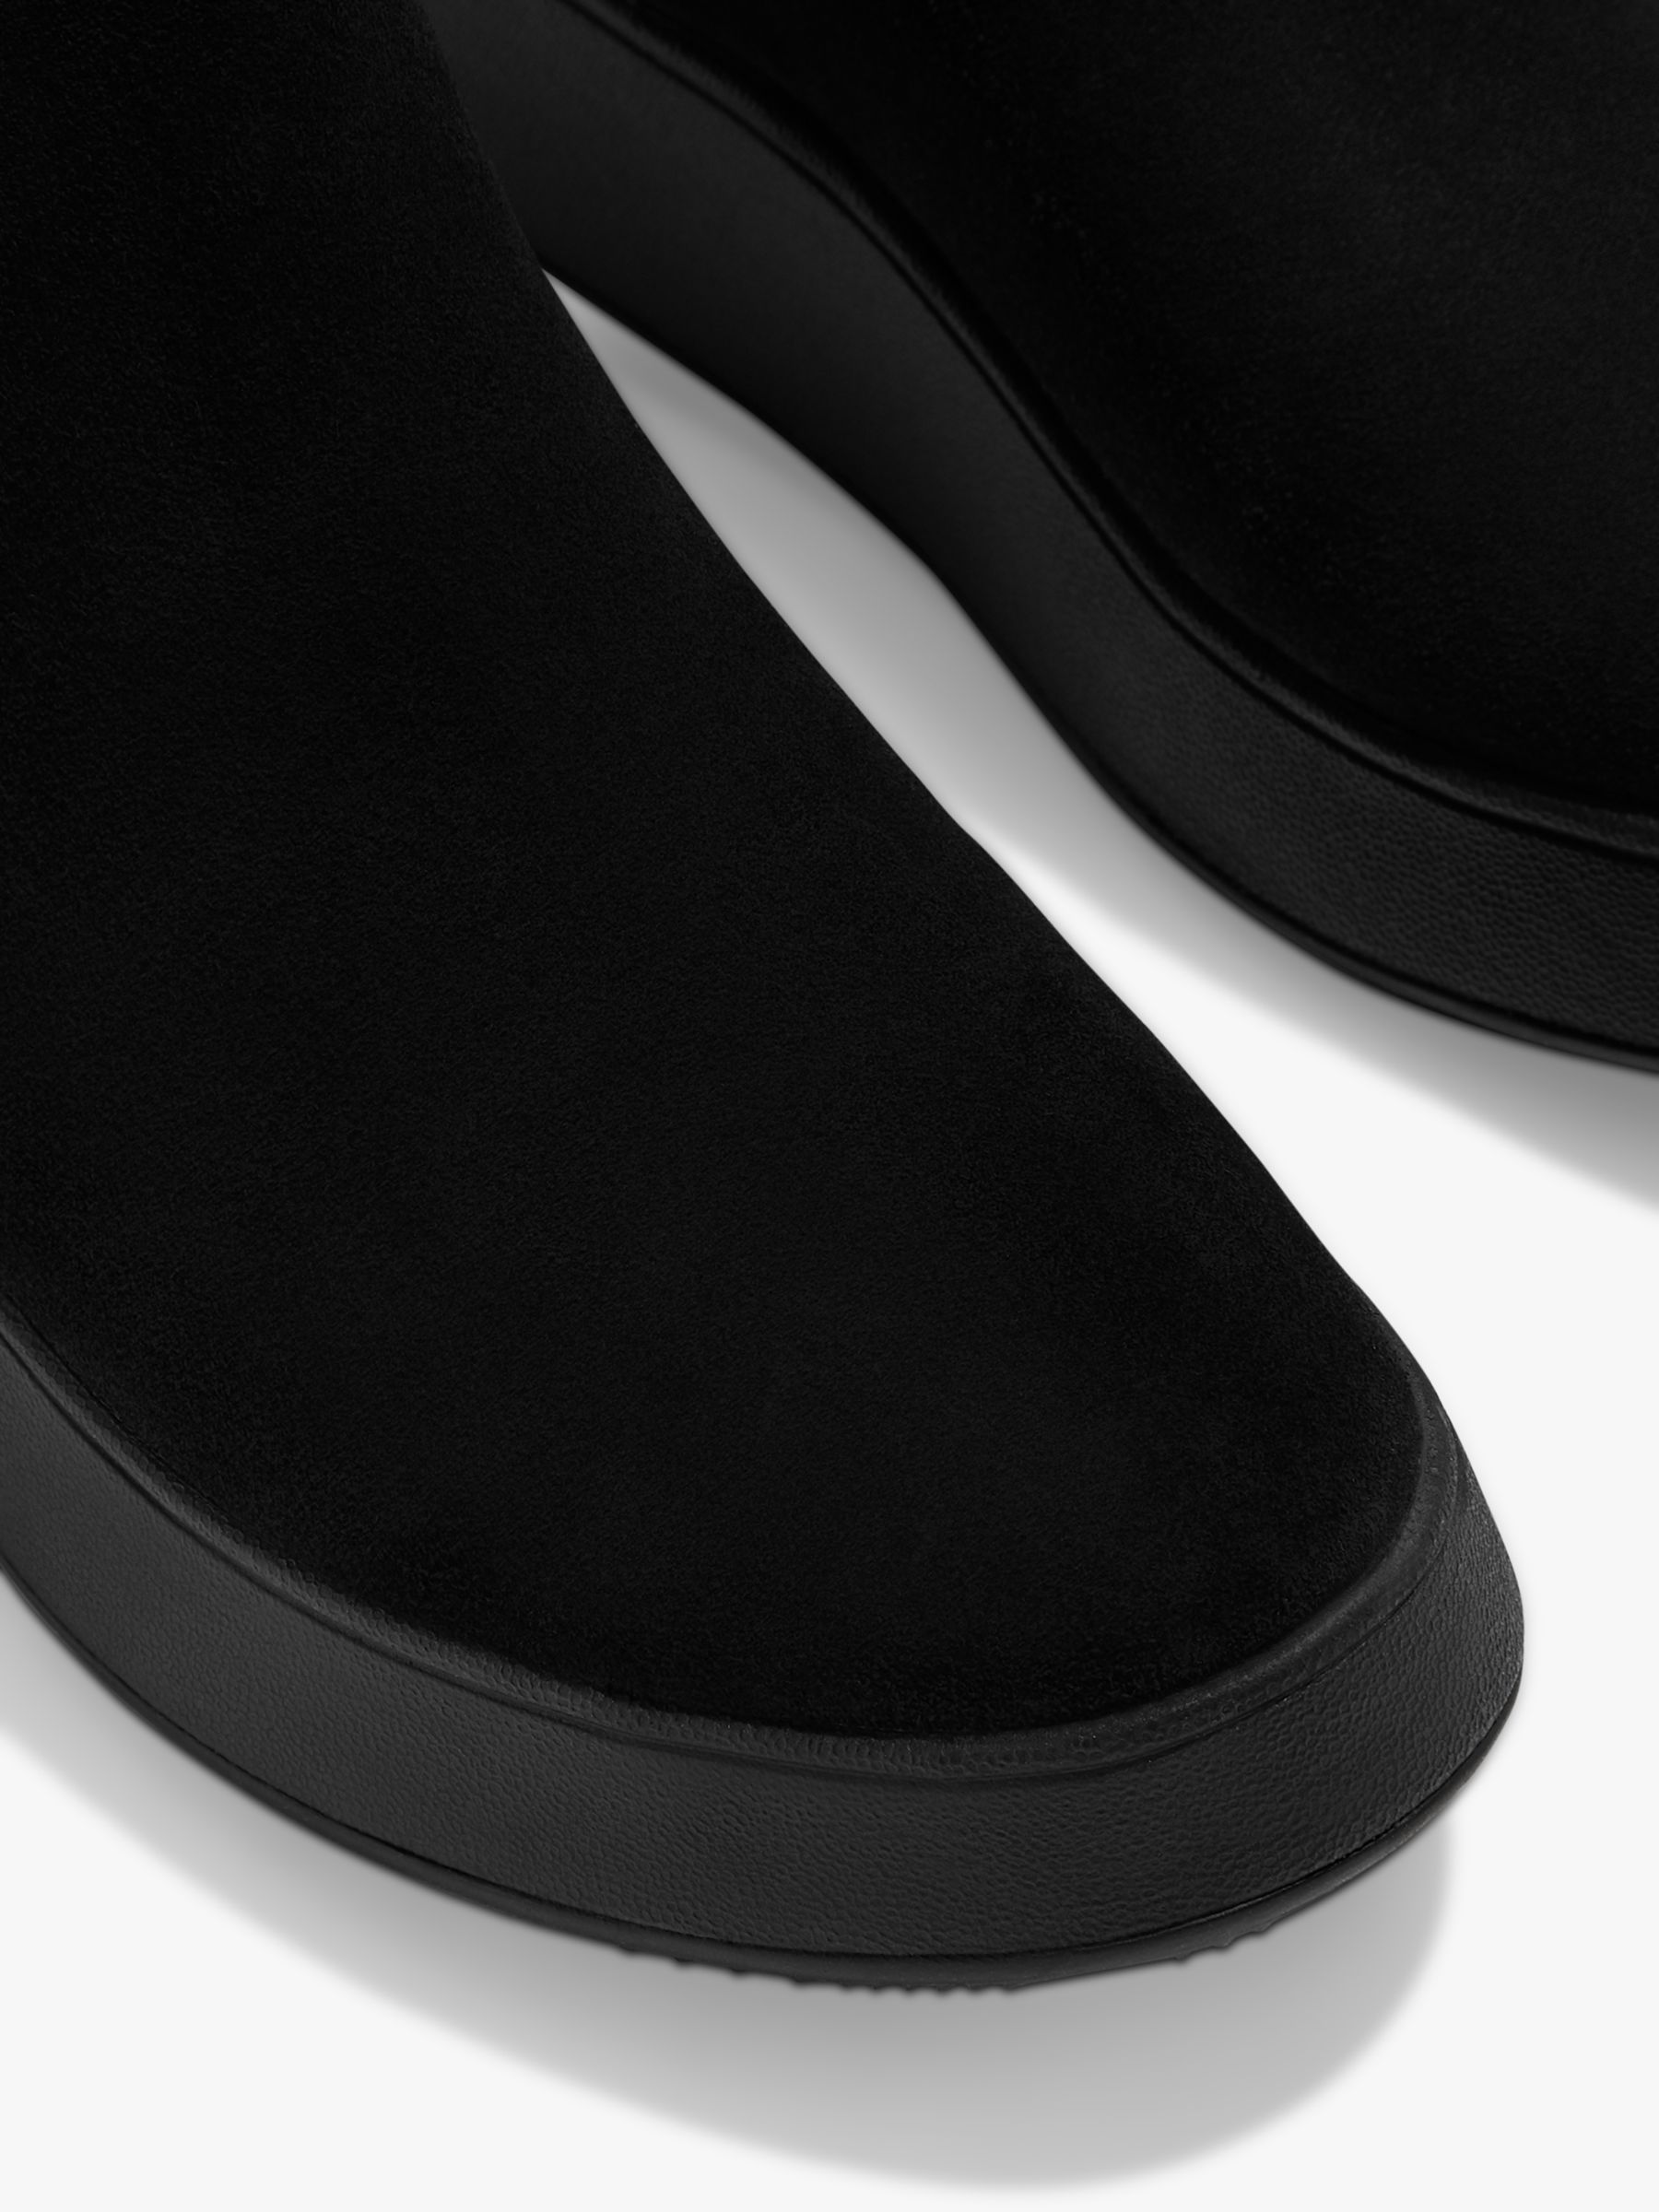 FitFlop Suede Flatform Chelsea Boots, Black at Lewis Partners